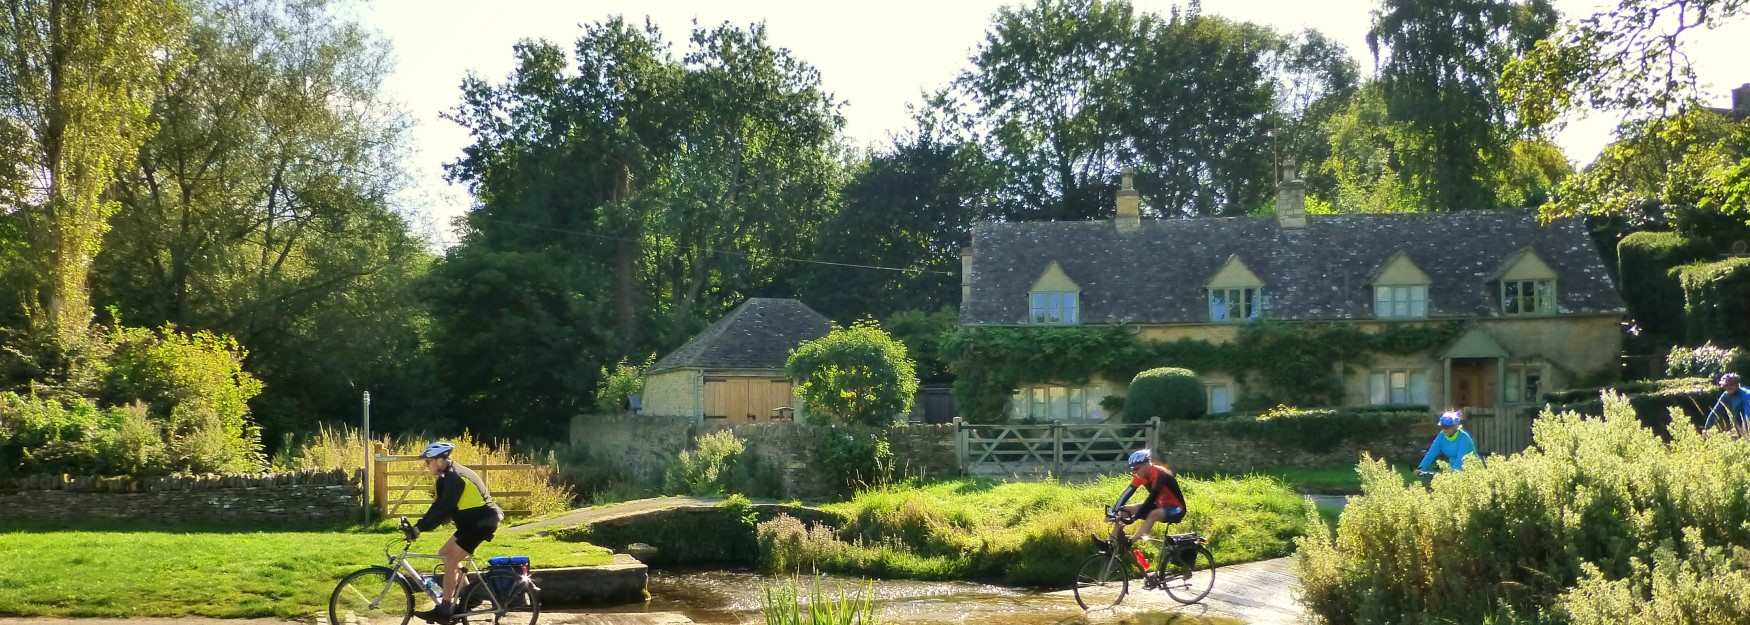 Group cycling through a picturesque Cotswold village with Bainton Bikes